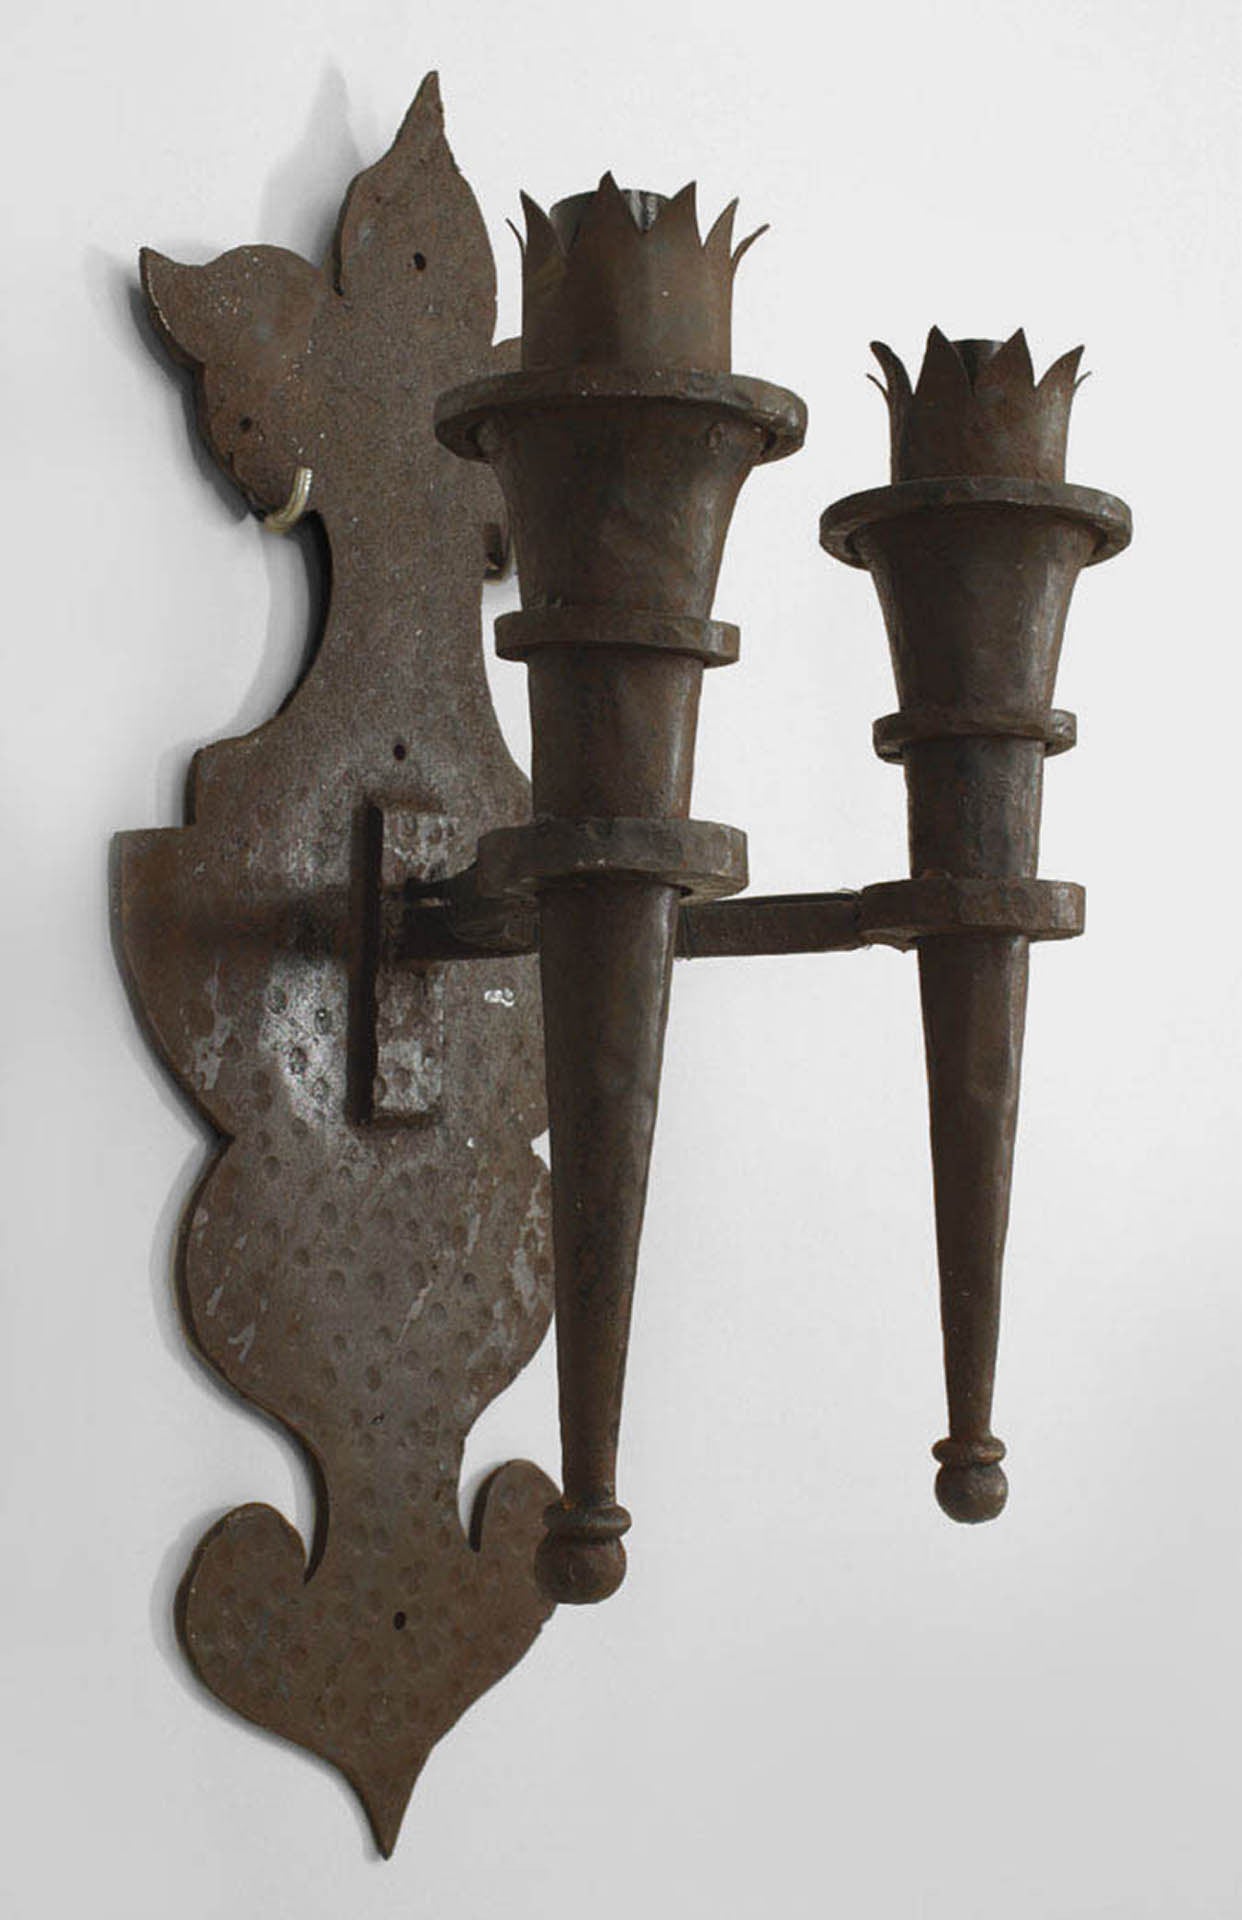 American Renaissance Revival style wrought iron wall sconces with double
torch design arms and shaped back plate, 20th century.